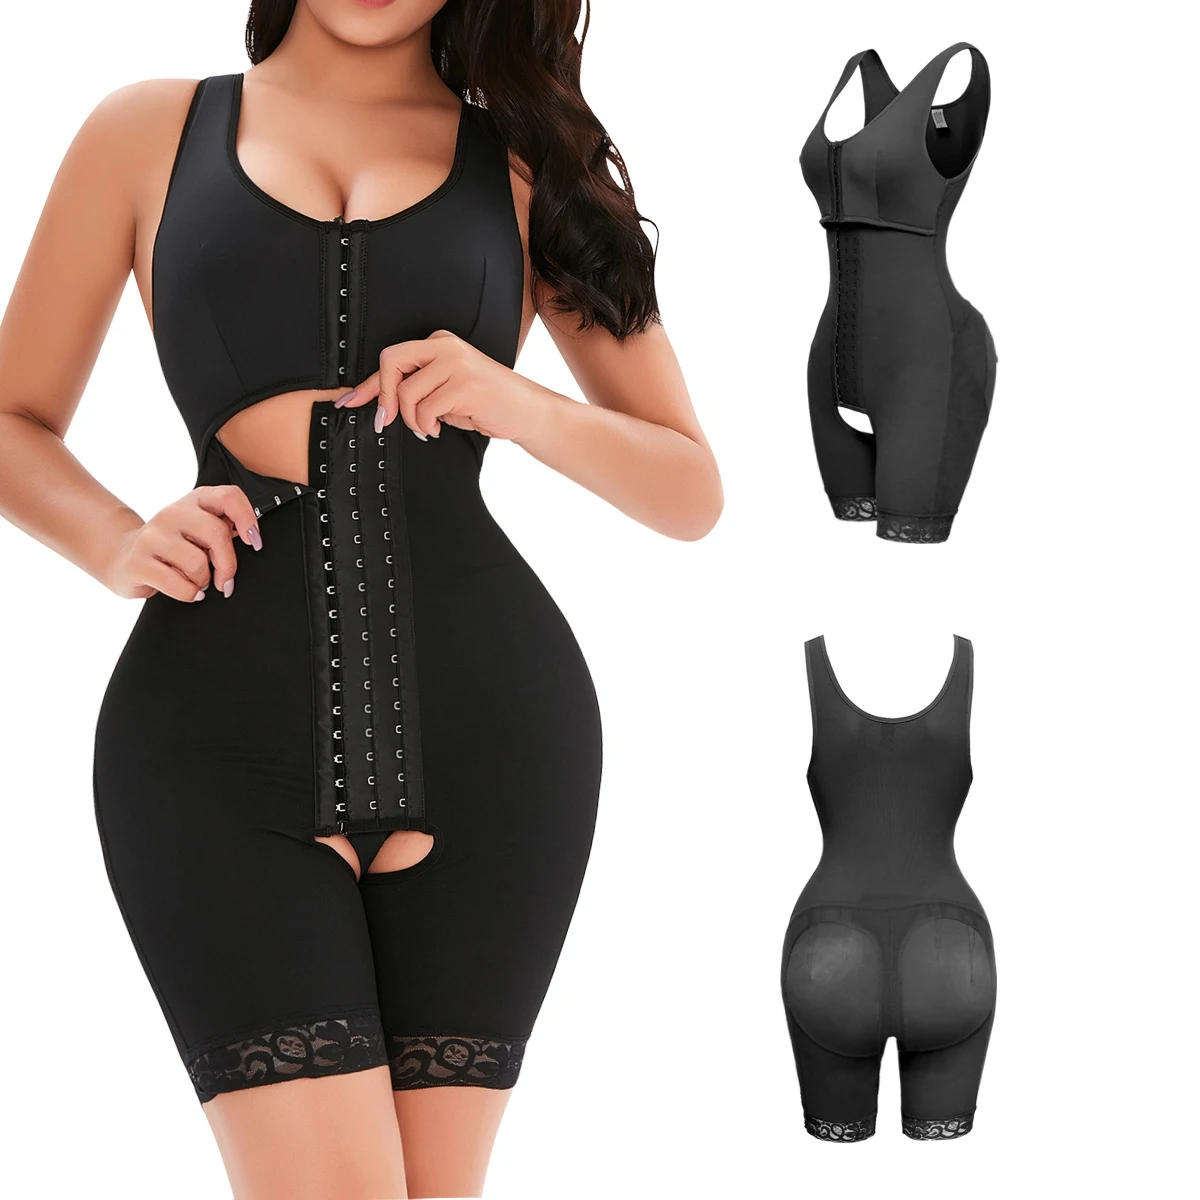 

2021 Latest Women's slimming fajas body shaping weight loss Shape wear compression garment for liposuction, Black, skin